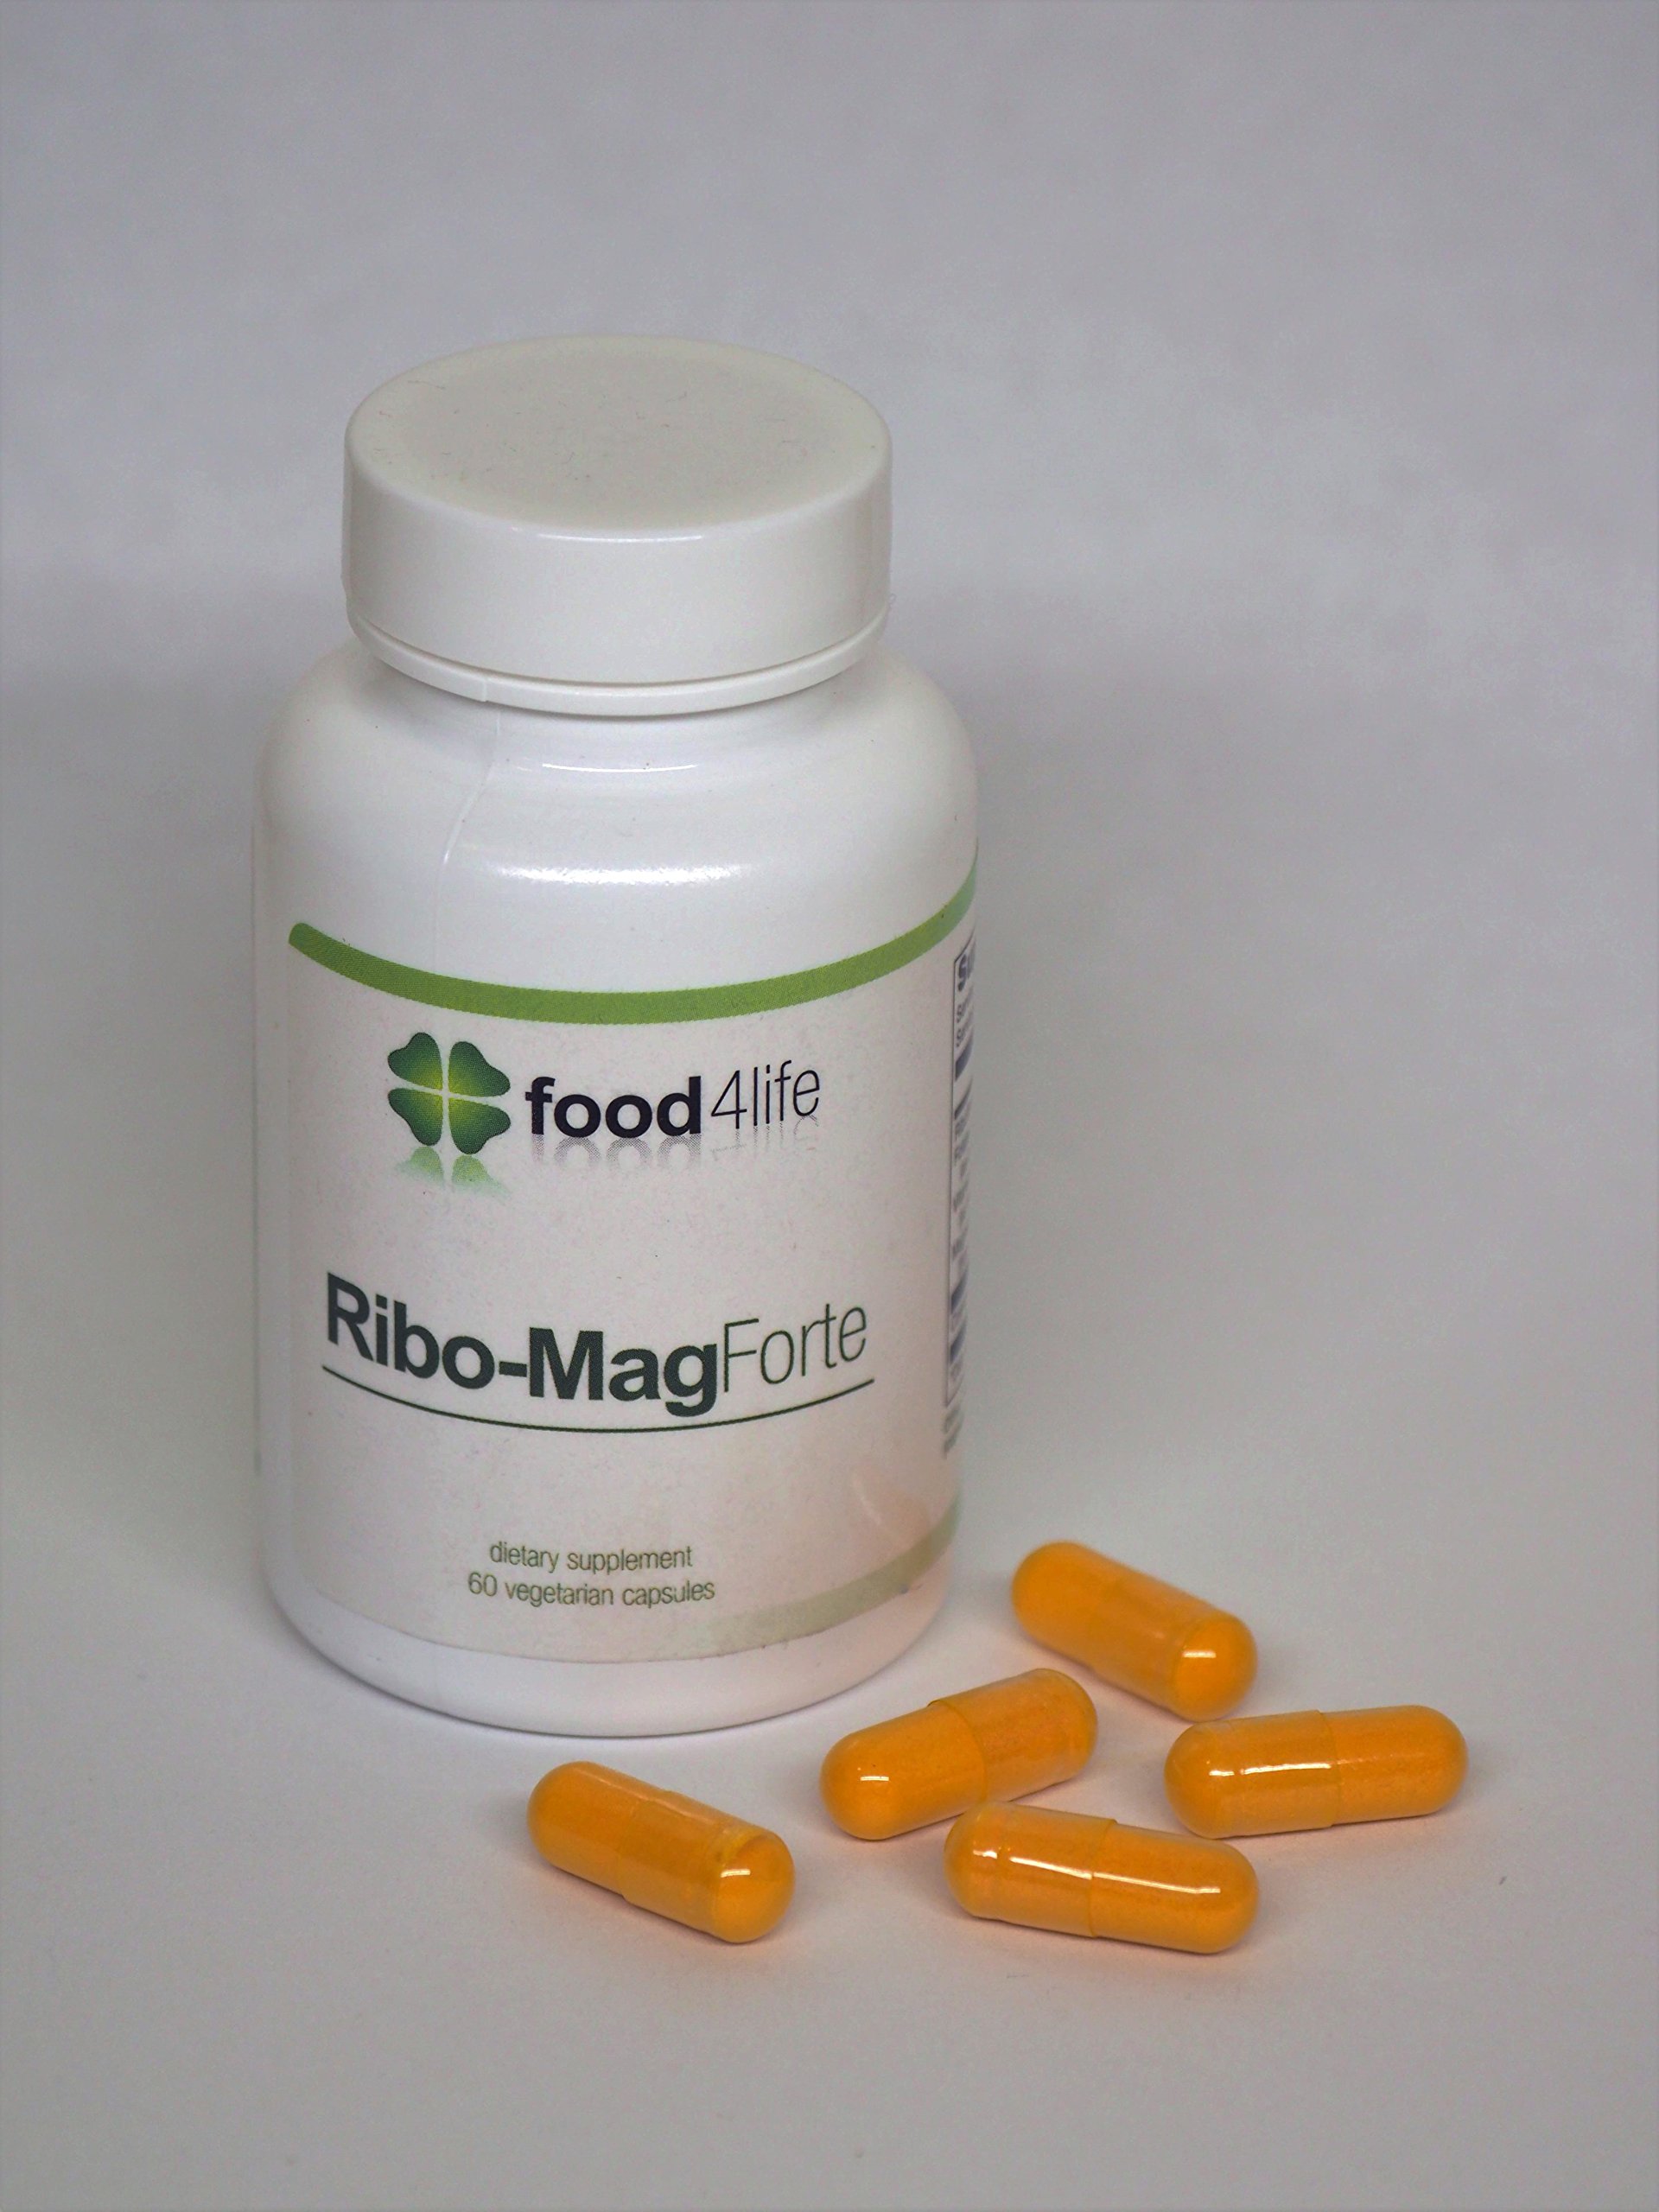 Ribo-Mag Forte-for MIGRAINE Relief. Developed by Neurologists and MIGRAINE Specialists.